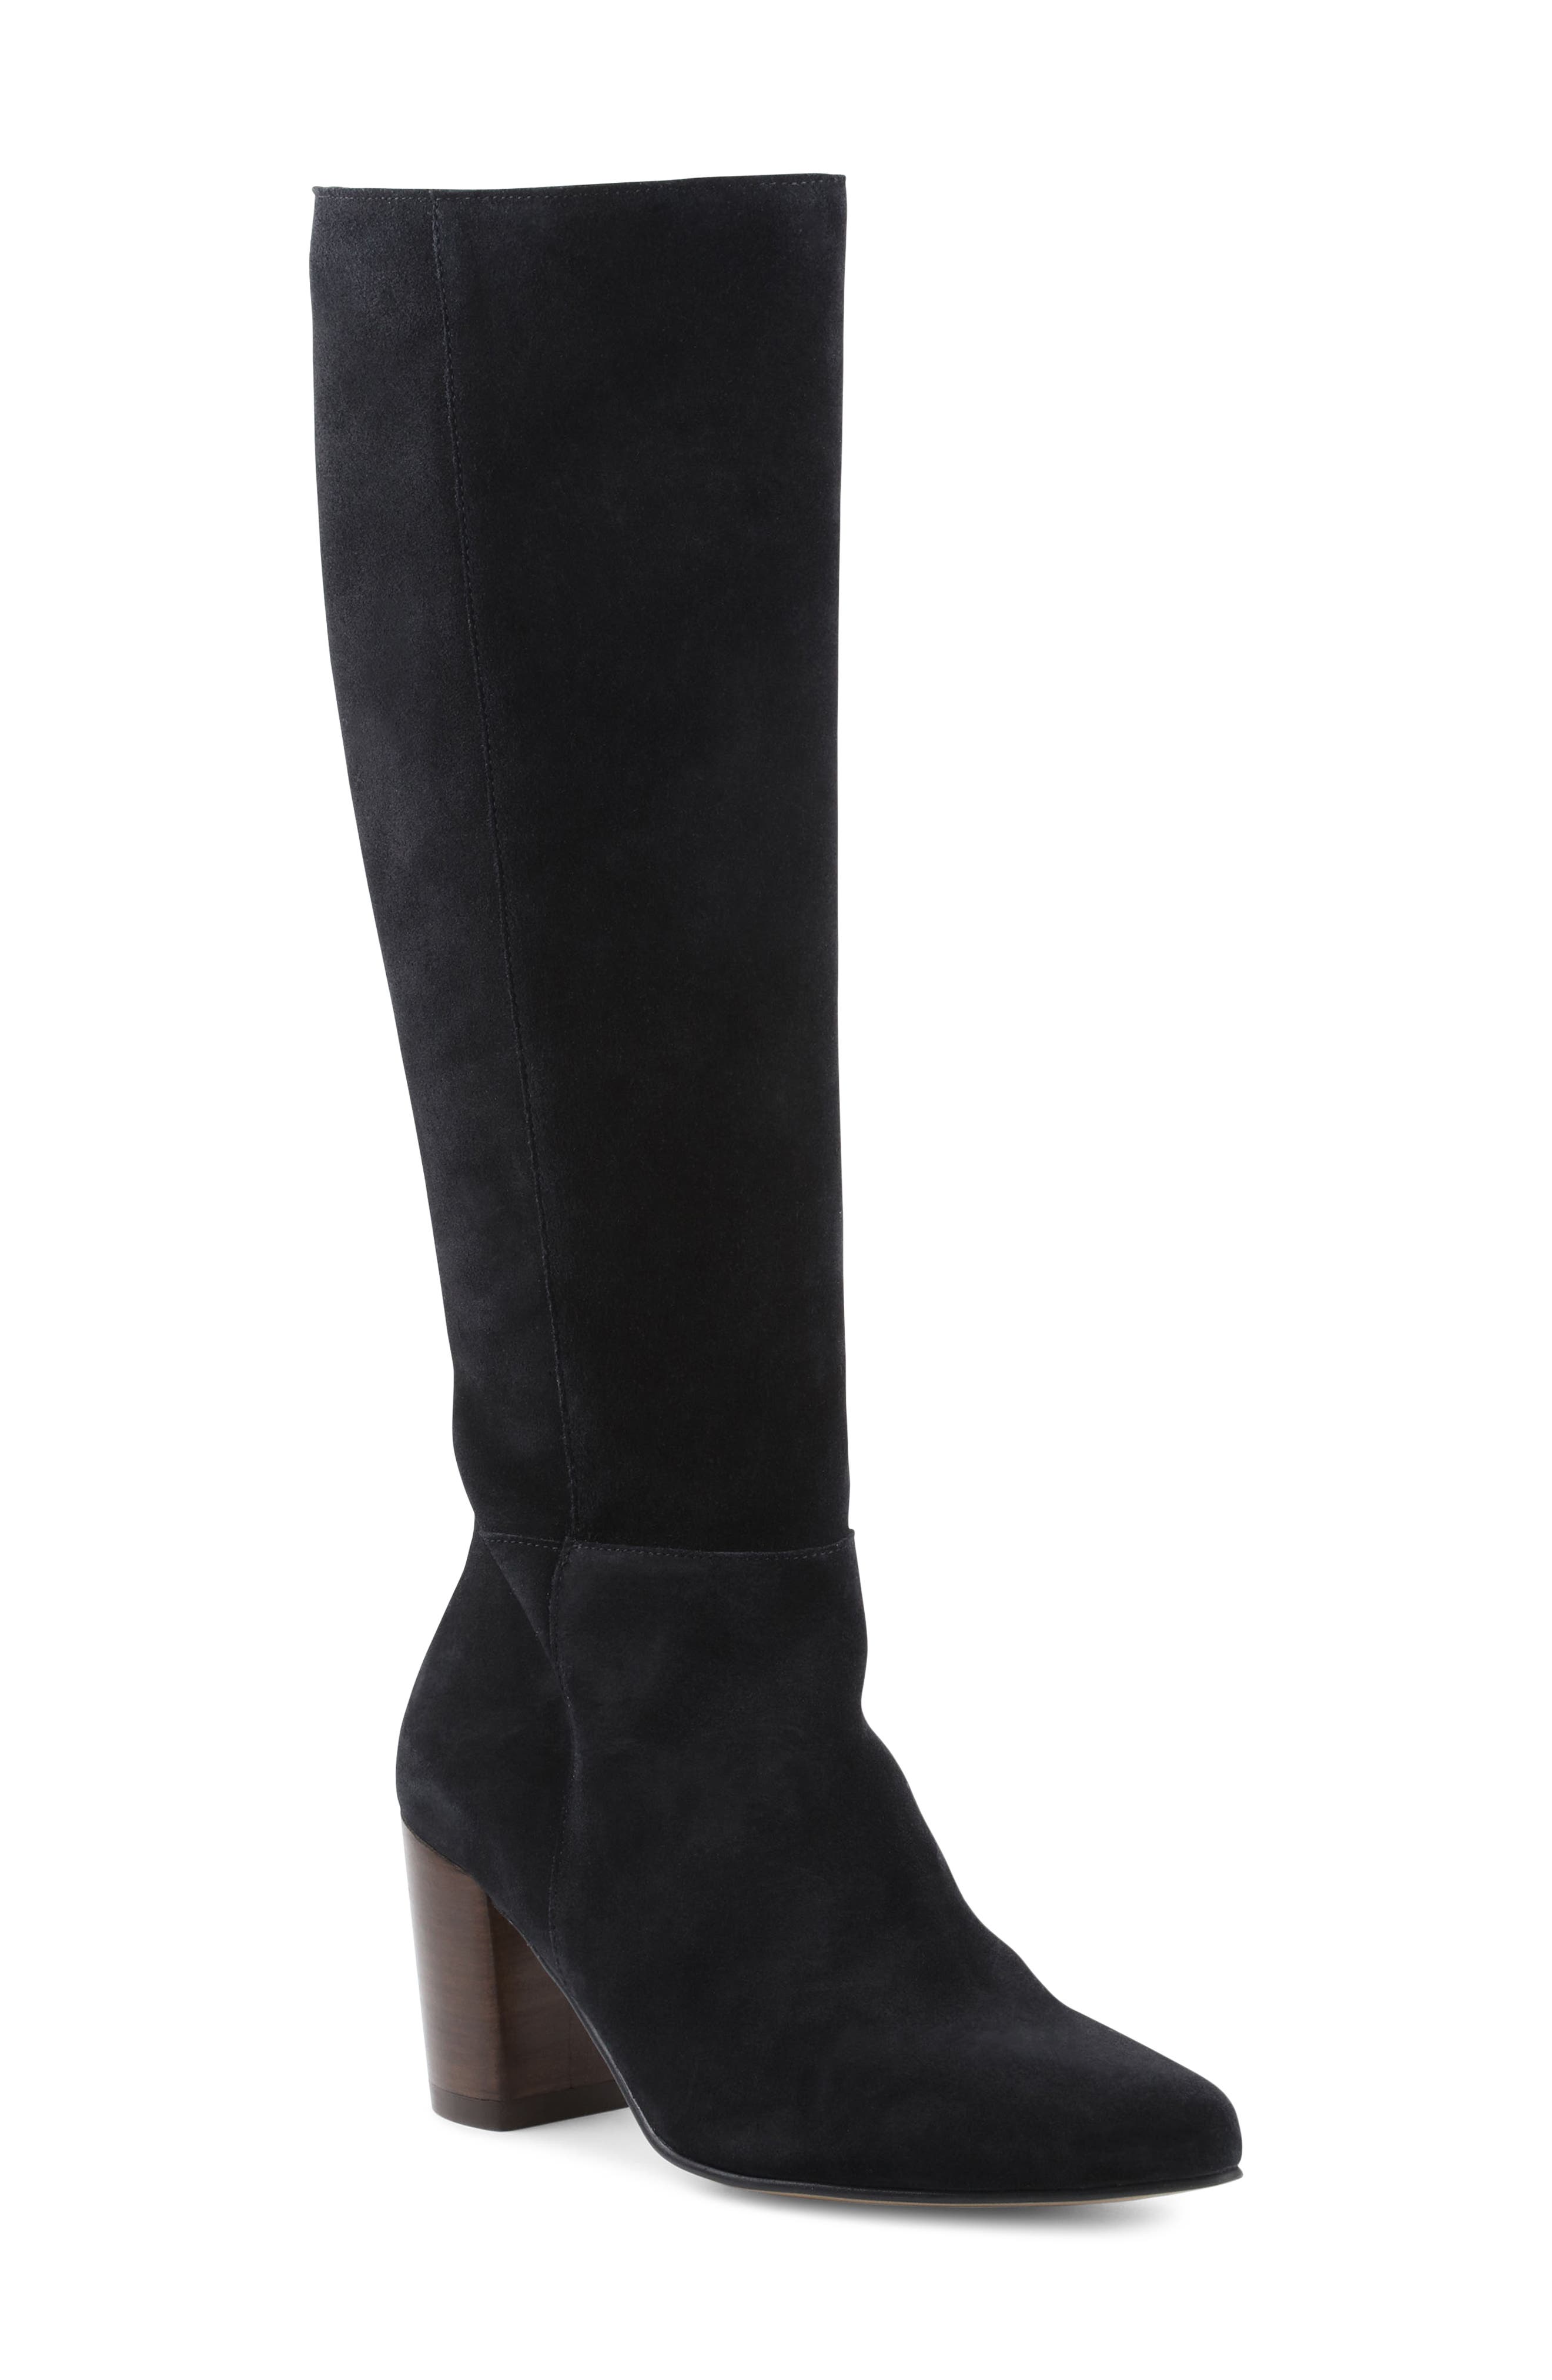 water resistant knee high boots